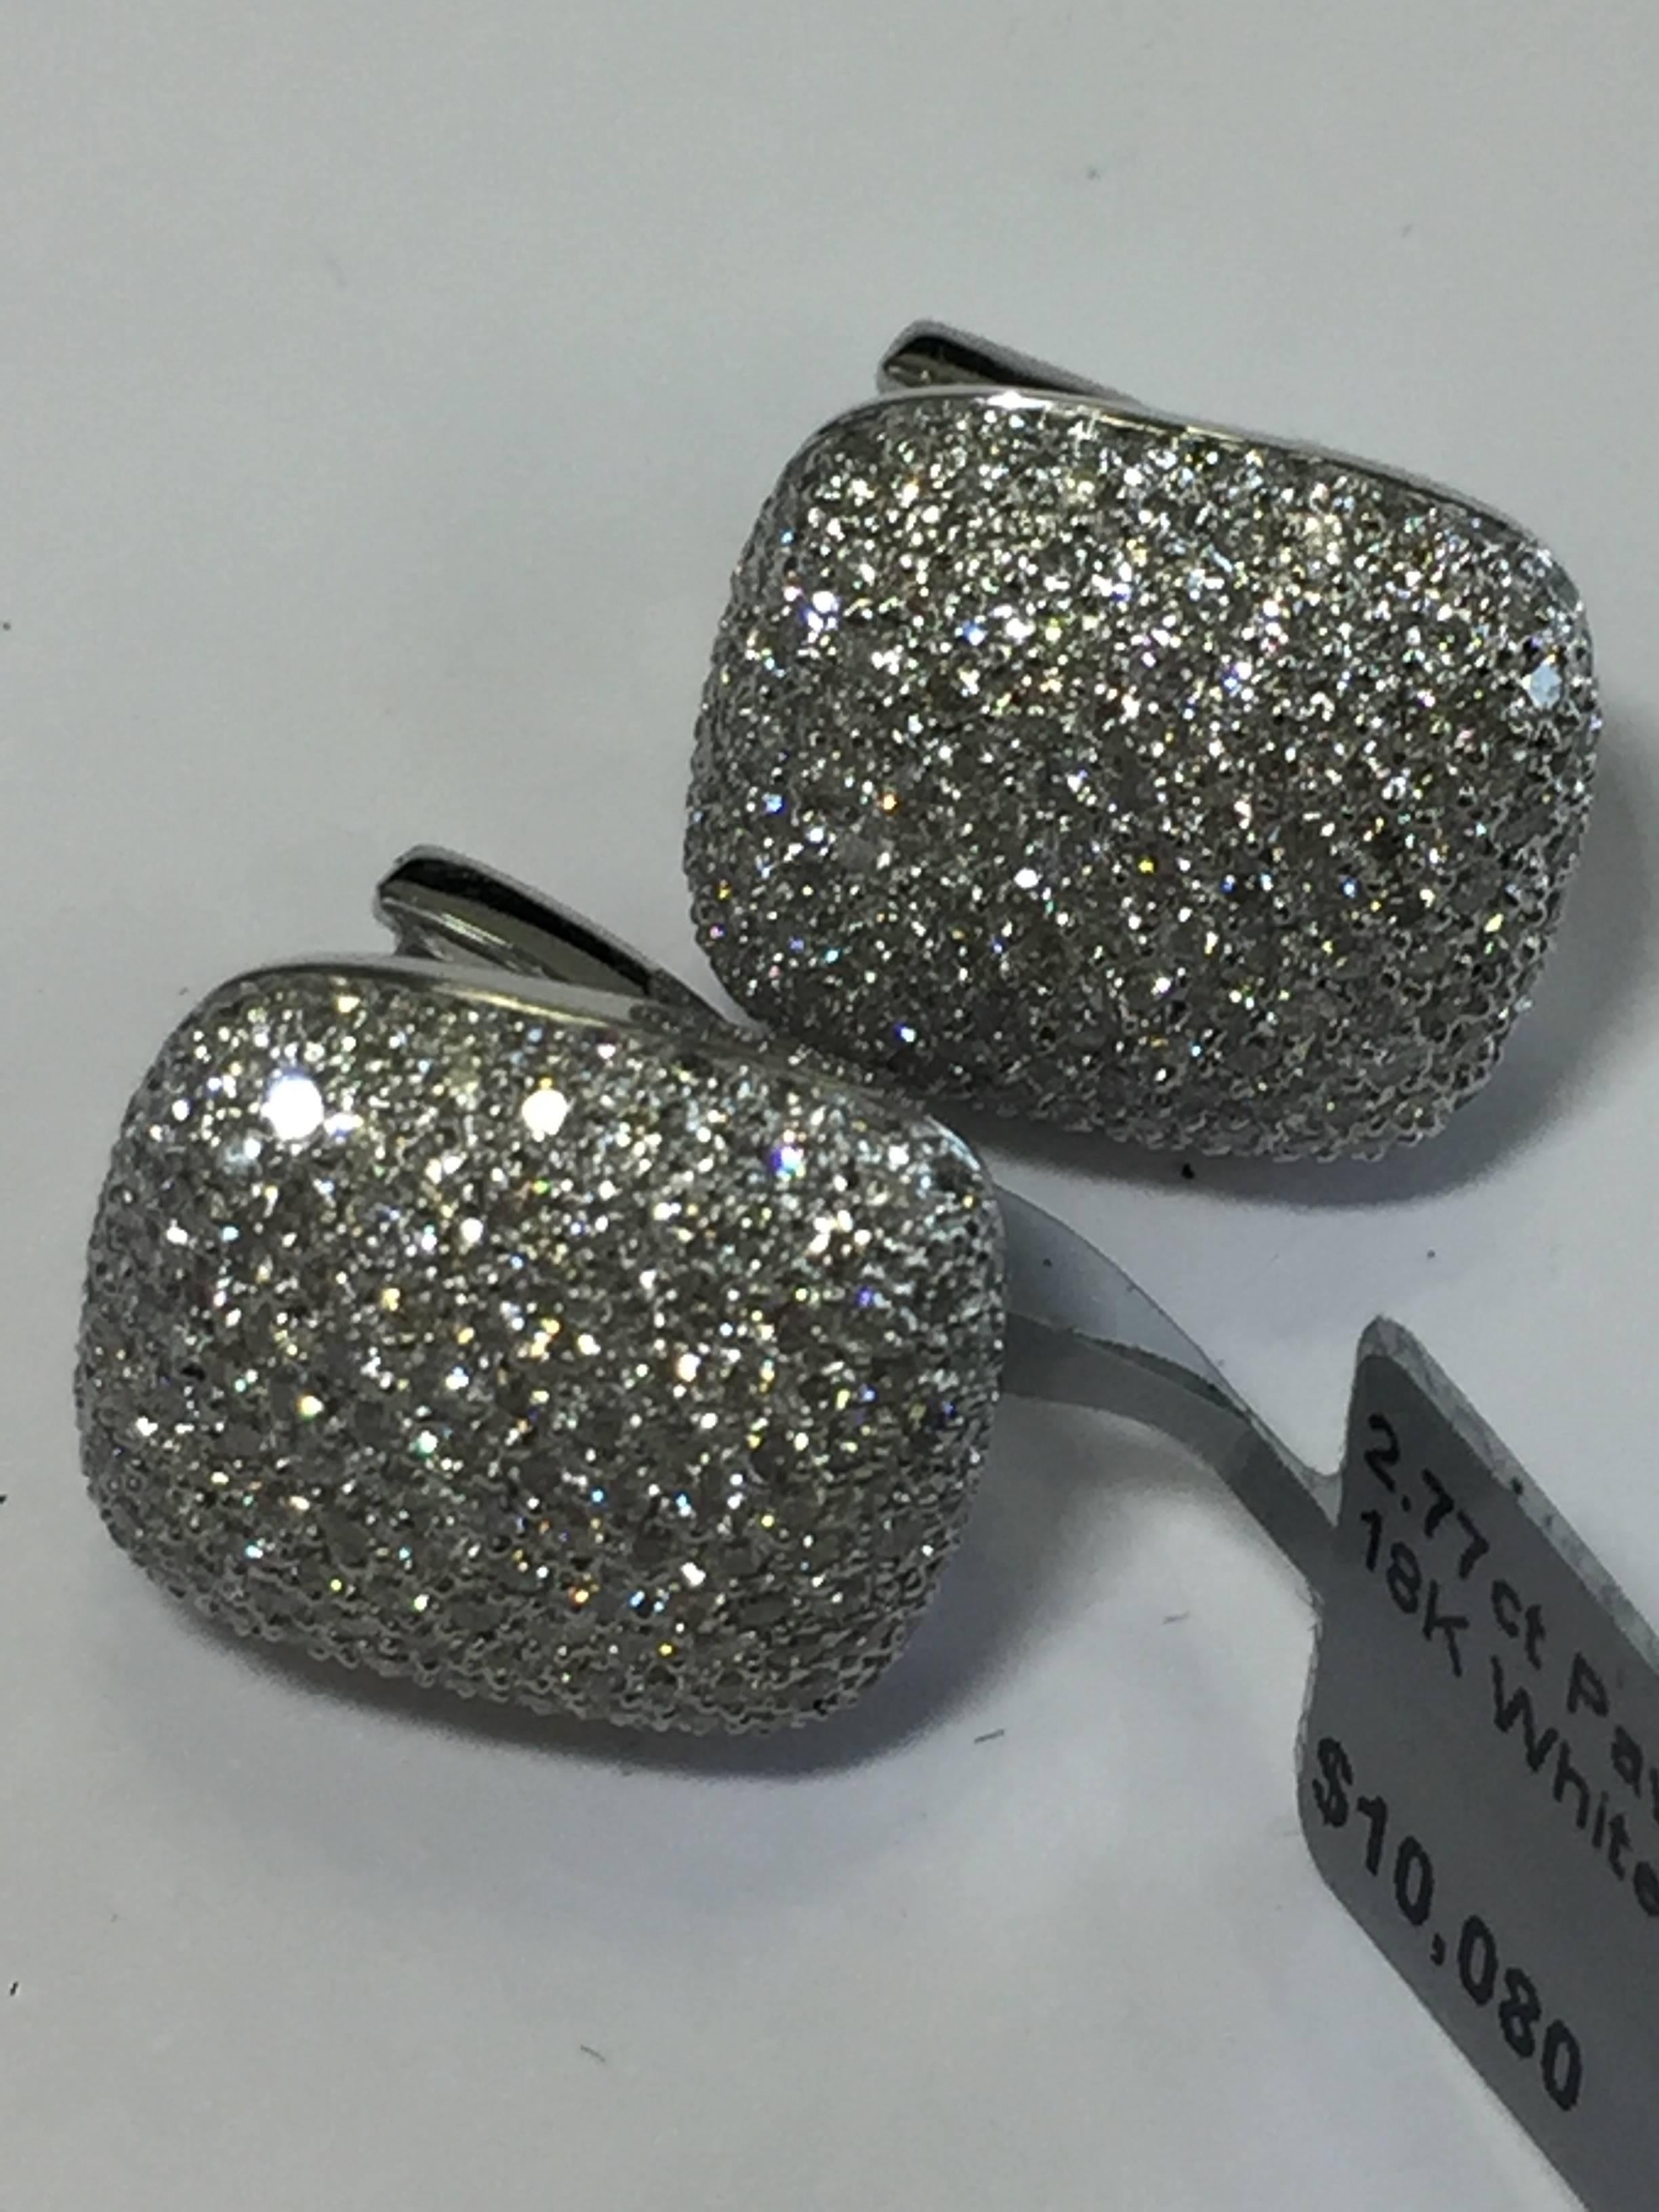 2.77 carats of gorgeous white diamonds in these pave 18k white gold earrings.  Easy to wear for any occasion and a great addition to any collection!